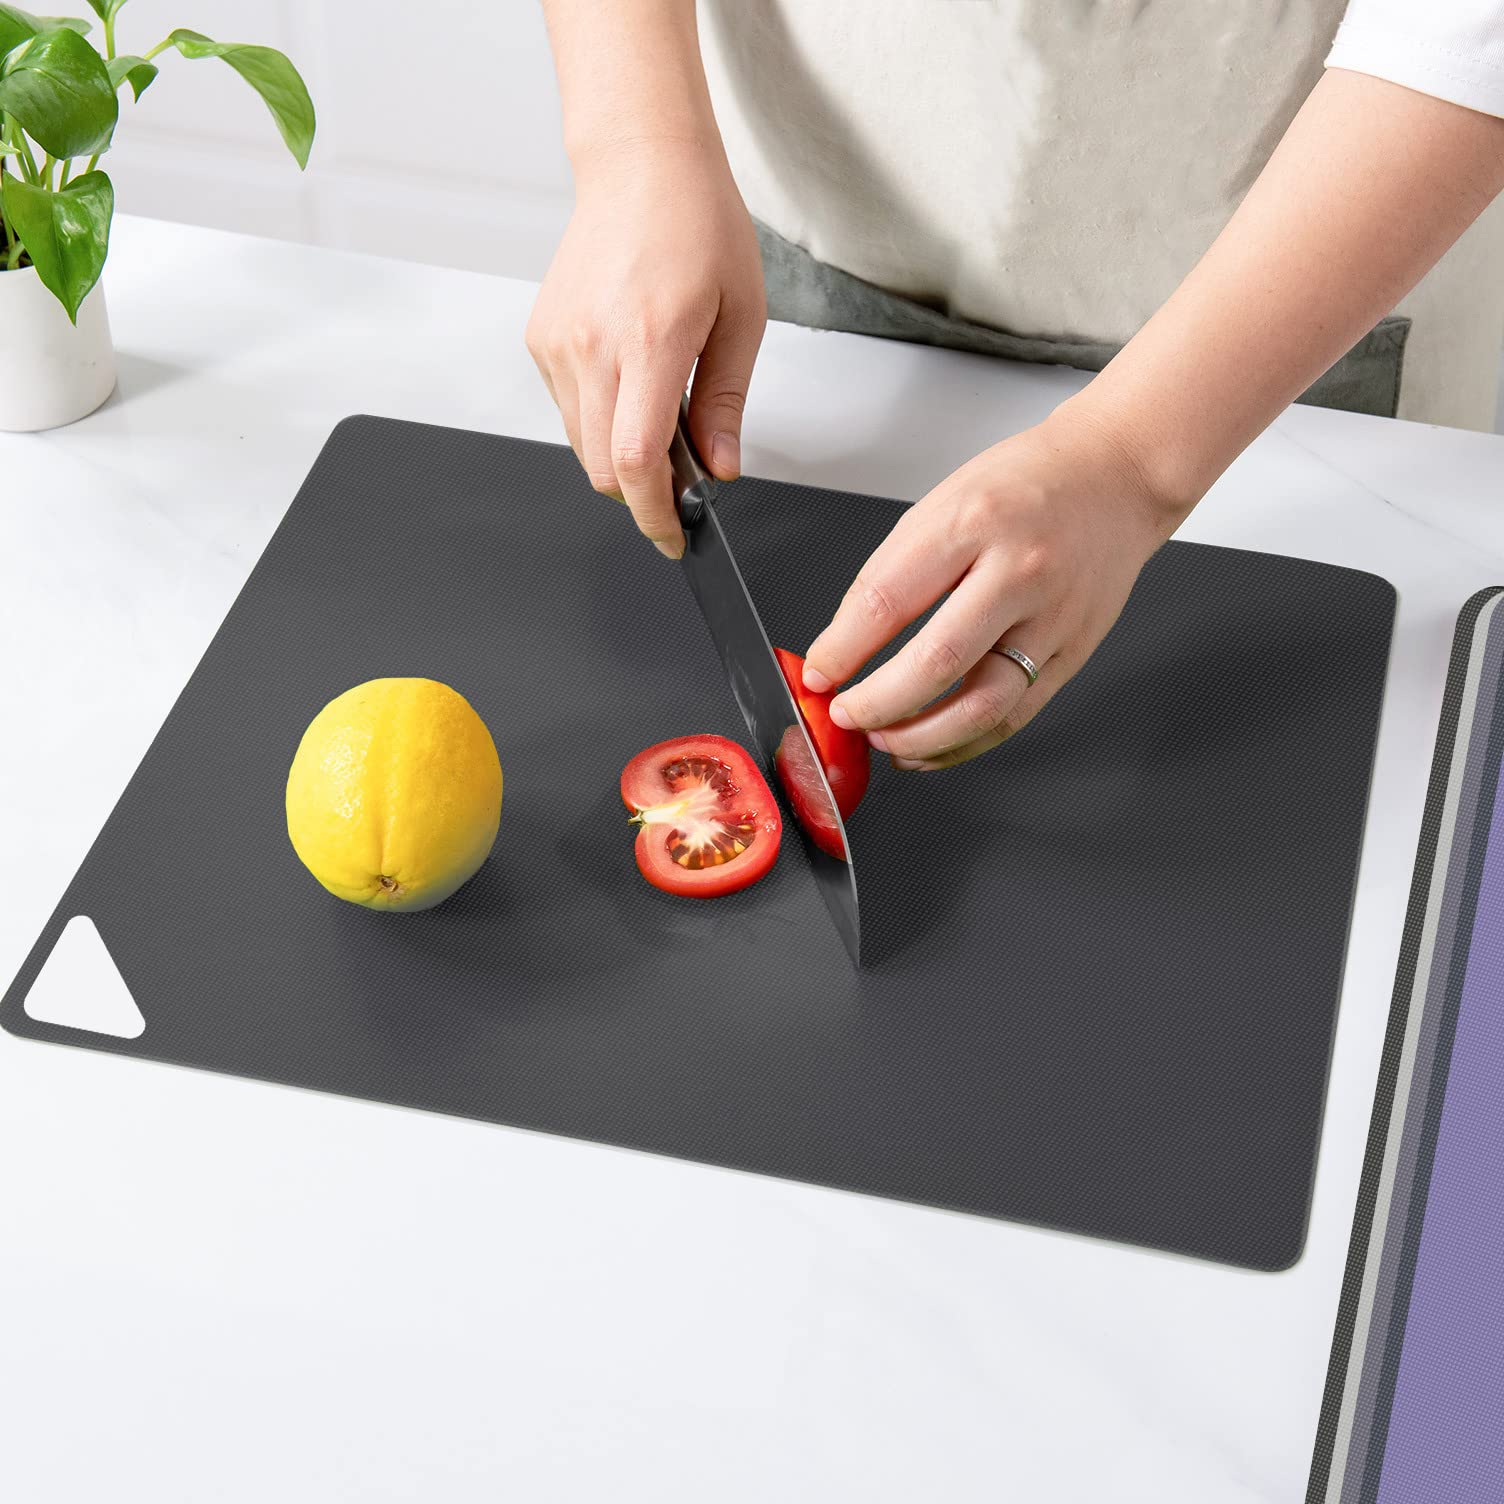 Plastic Cutting Boards for Kitchen, WK Flexible Cutting Board Mats Set of 3, Nonslip Cutting Board for Meat, Thin Cutting Sheets with Hole, Dishwasher Safe, BPA Free